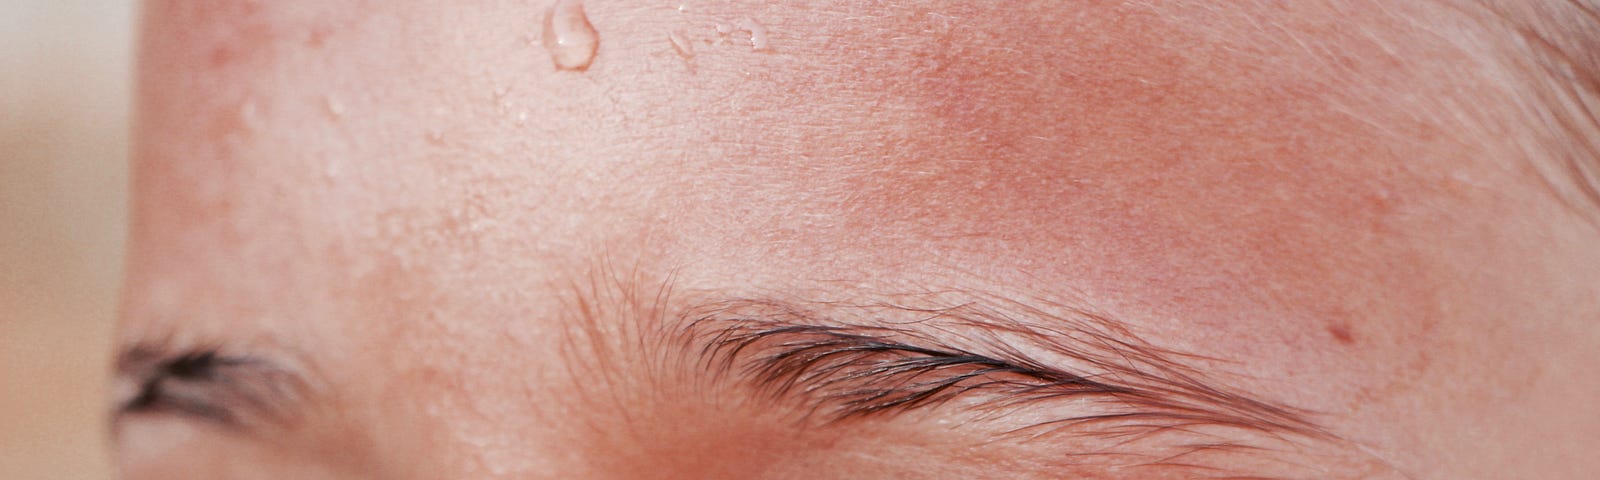 The sweaty forehead of a woman